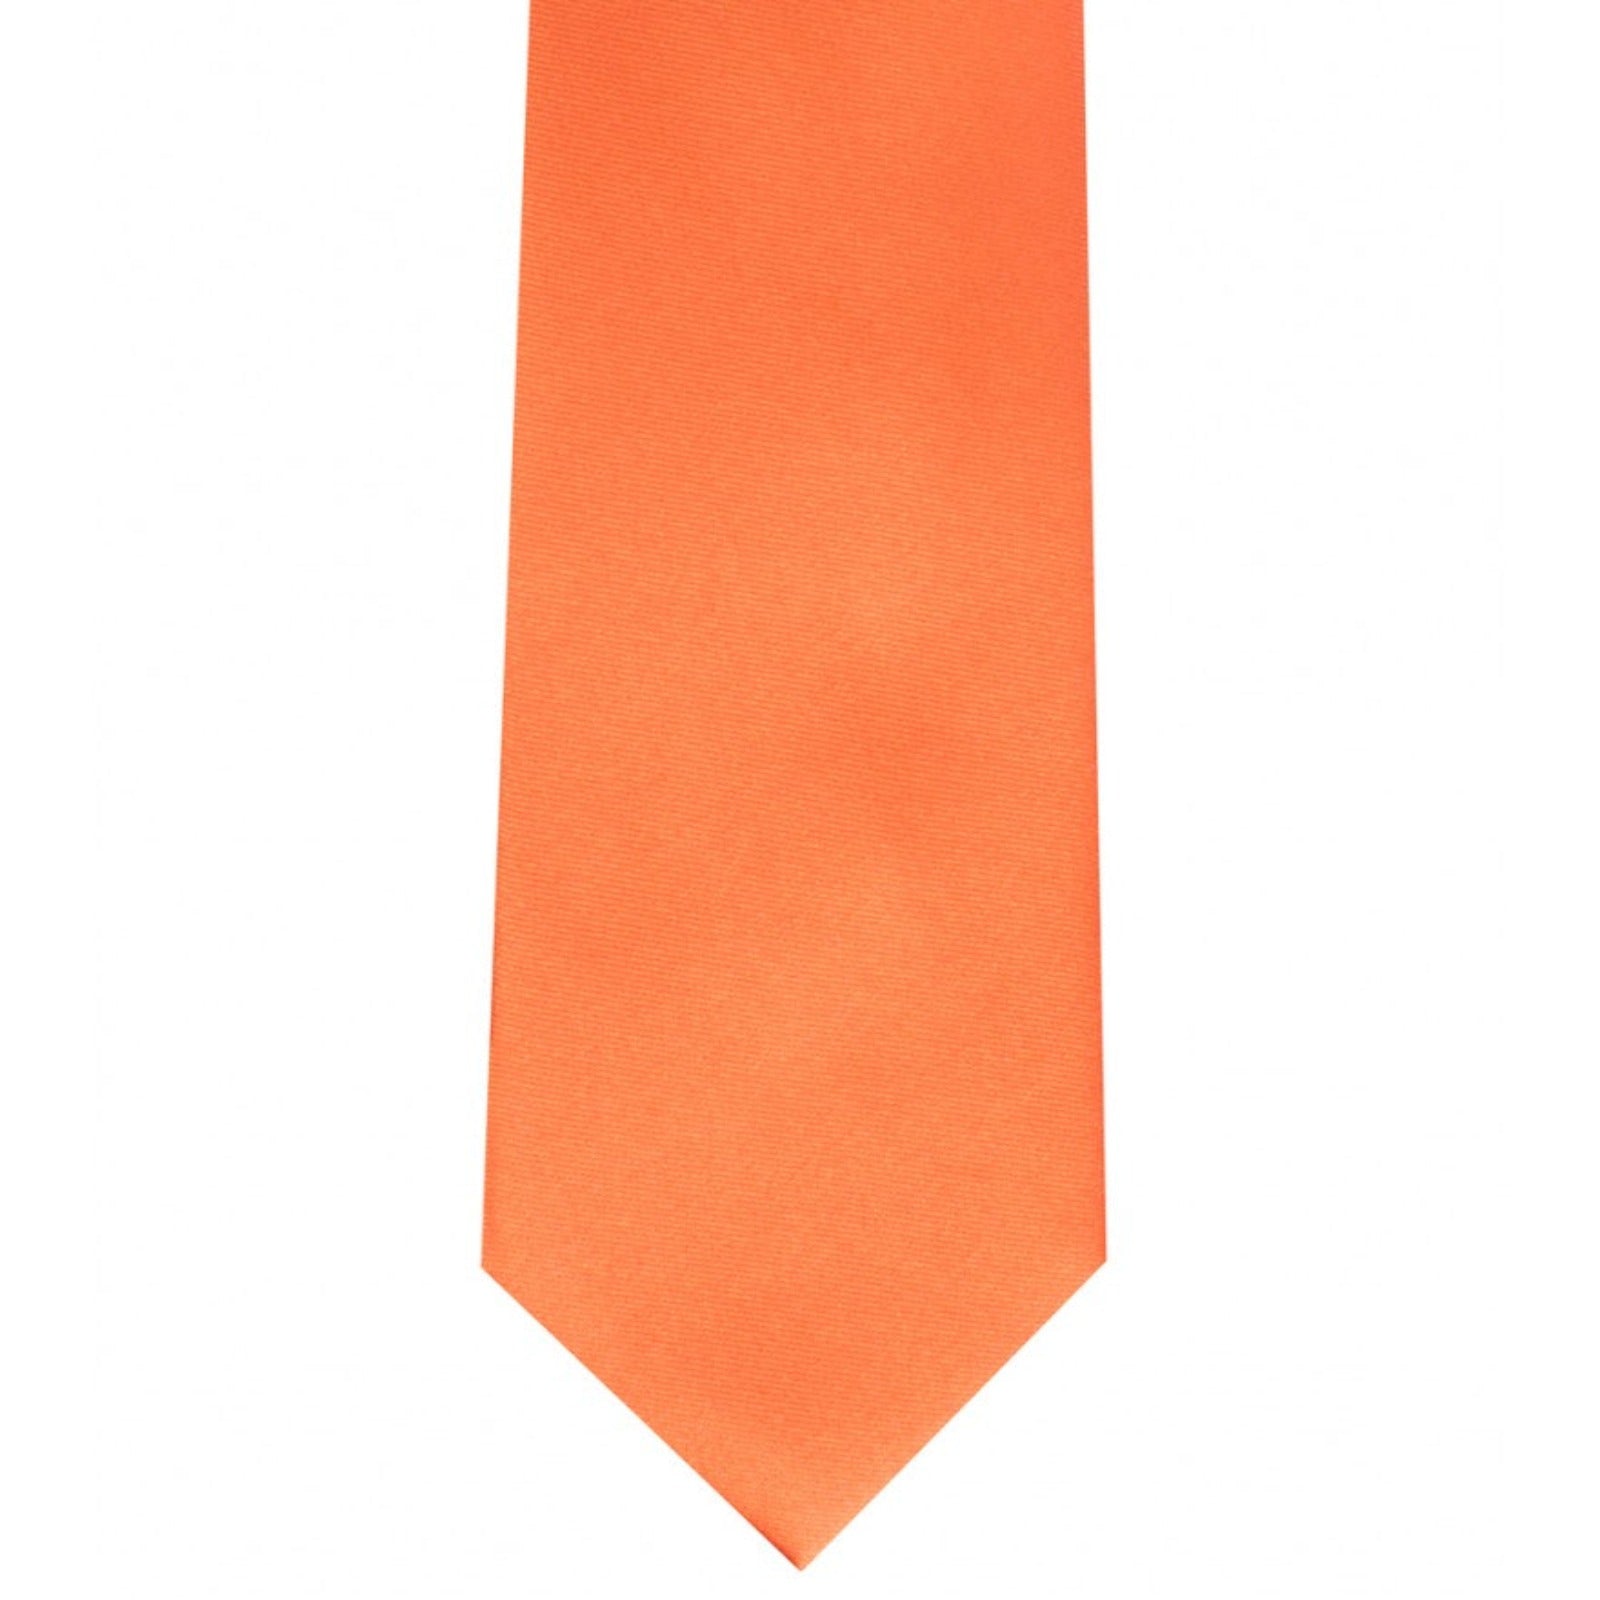 Classic Orange Tie Ultra Skinny tie width 2.25 inches With Matching Pocket Square | KCT Menswear